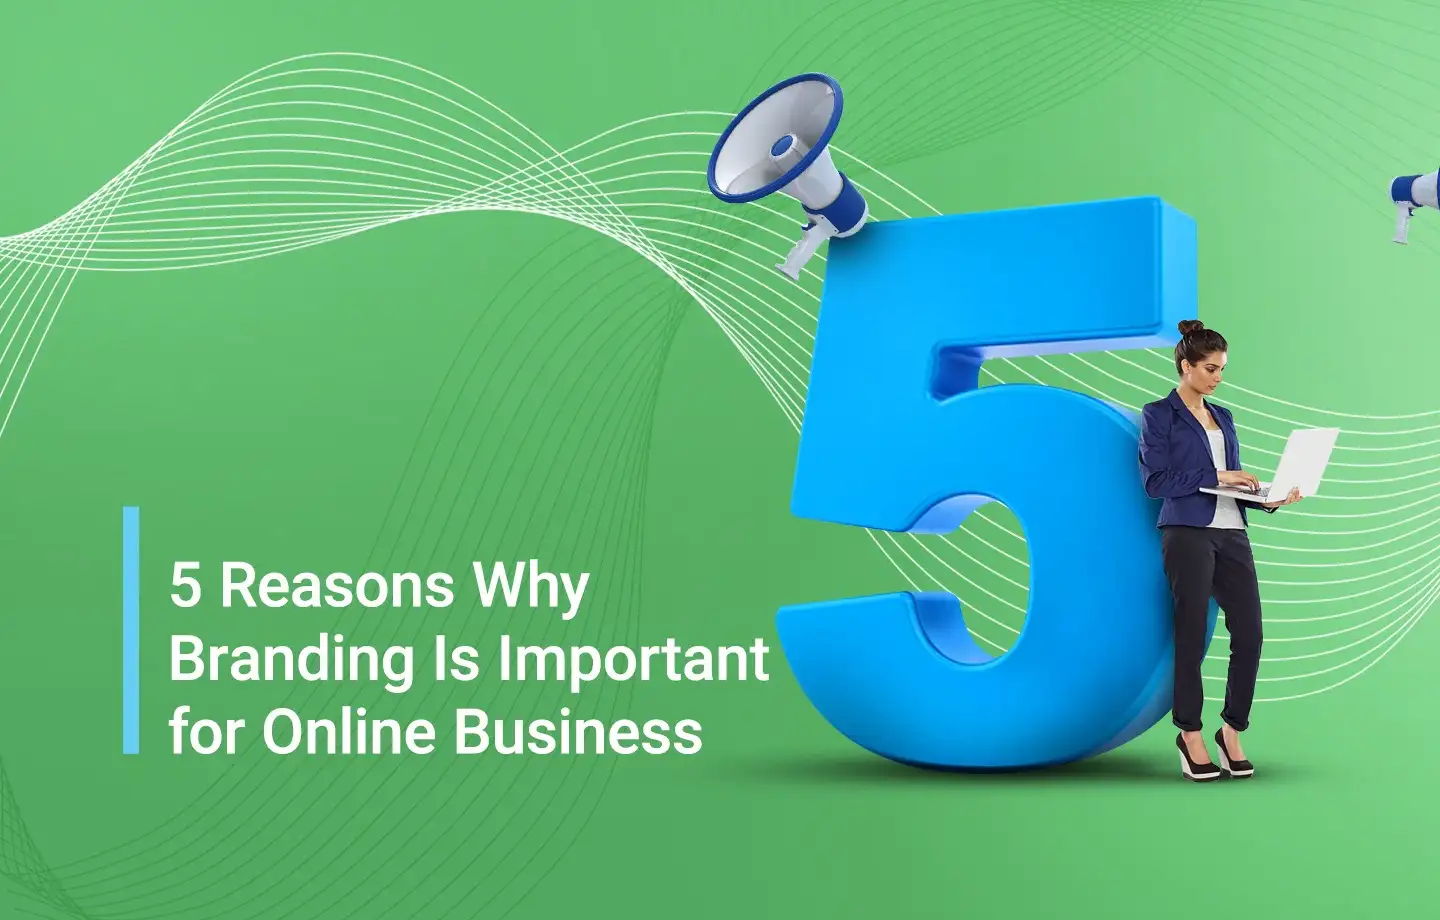 5 Reasons Why Branding Is Important for Online Business